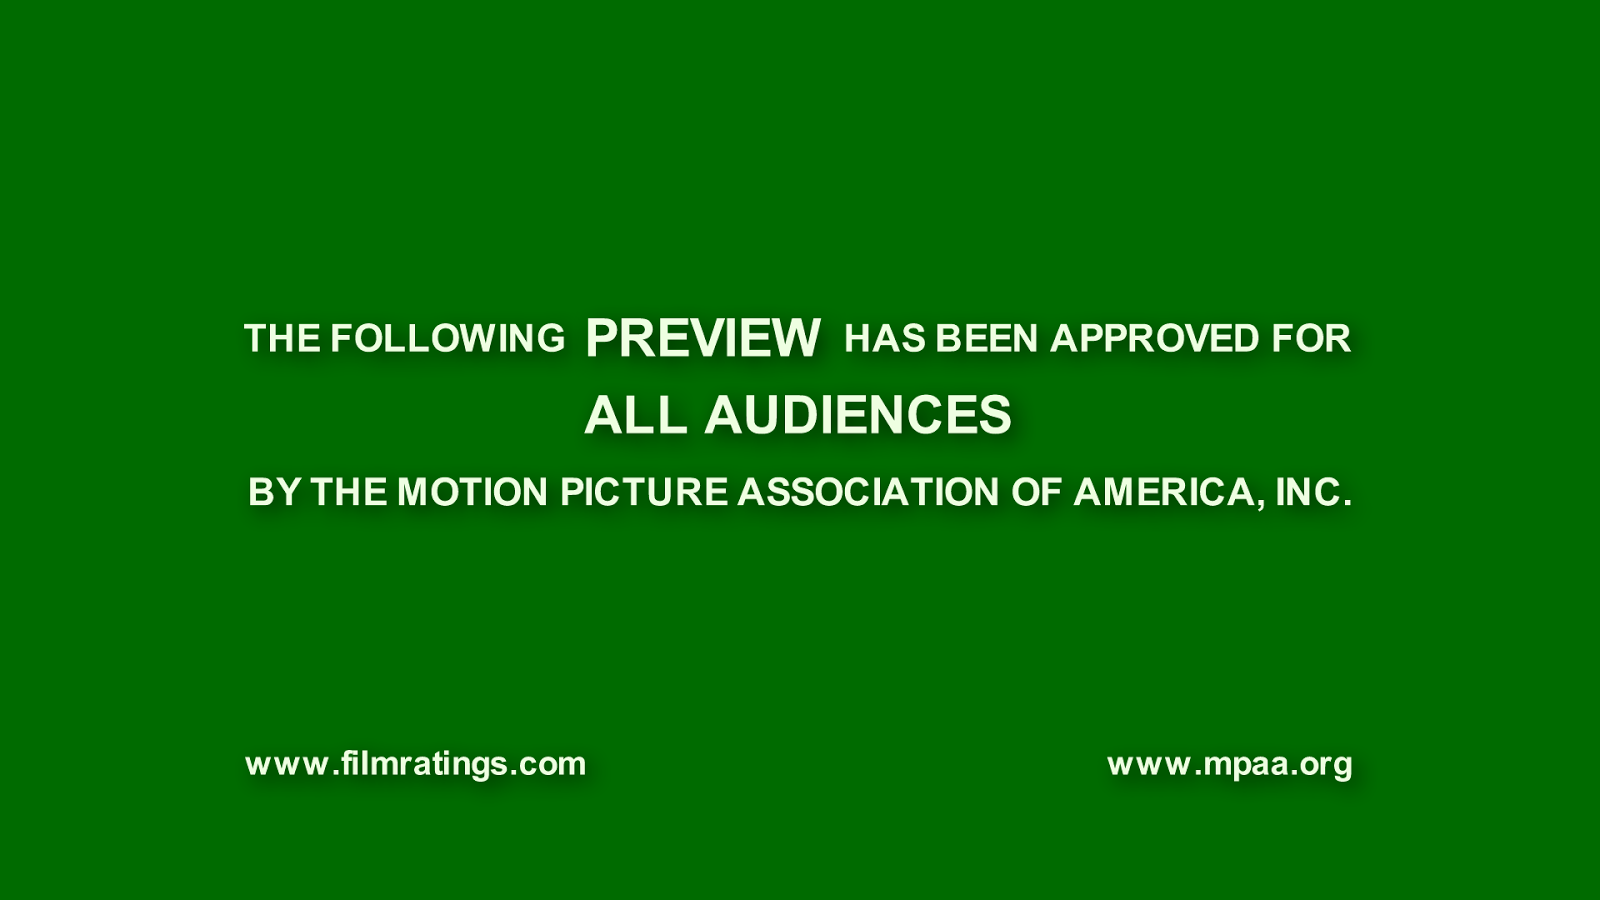 Filmmaking Gist Understanding The Principles Behind The Mpaa Movie